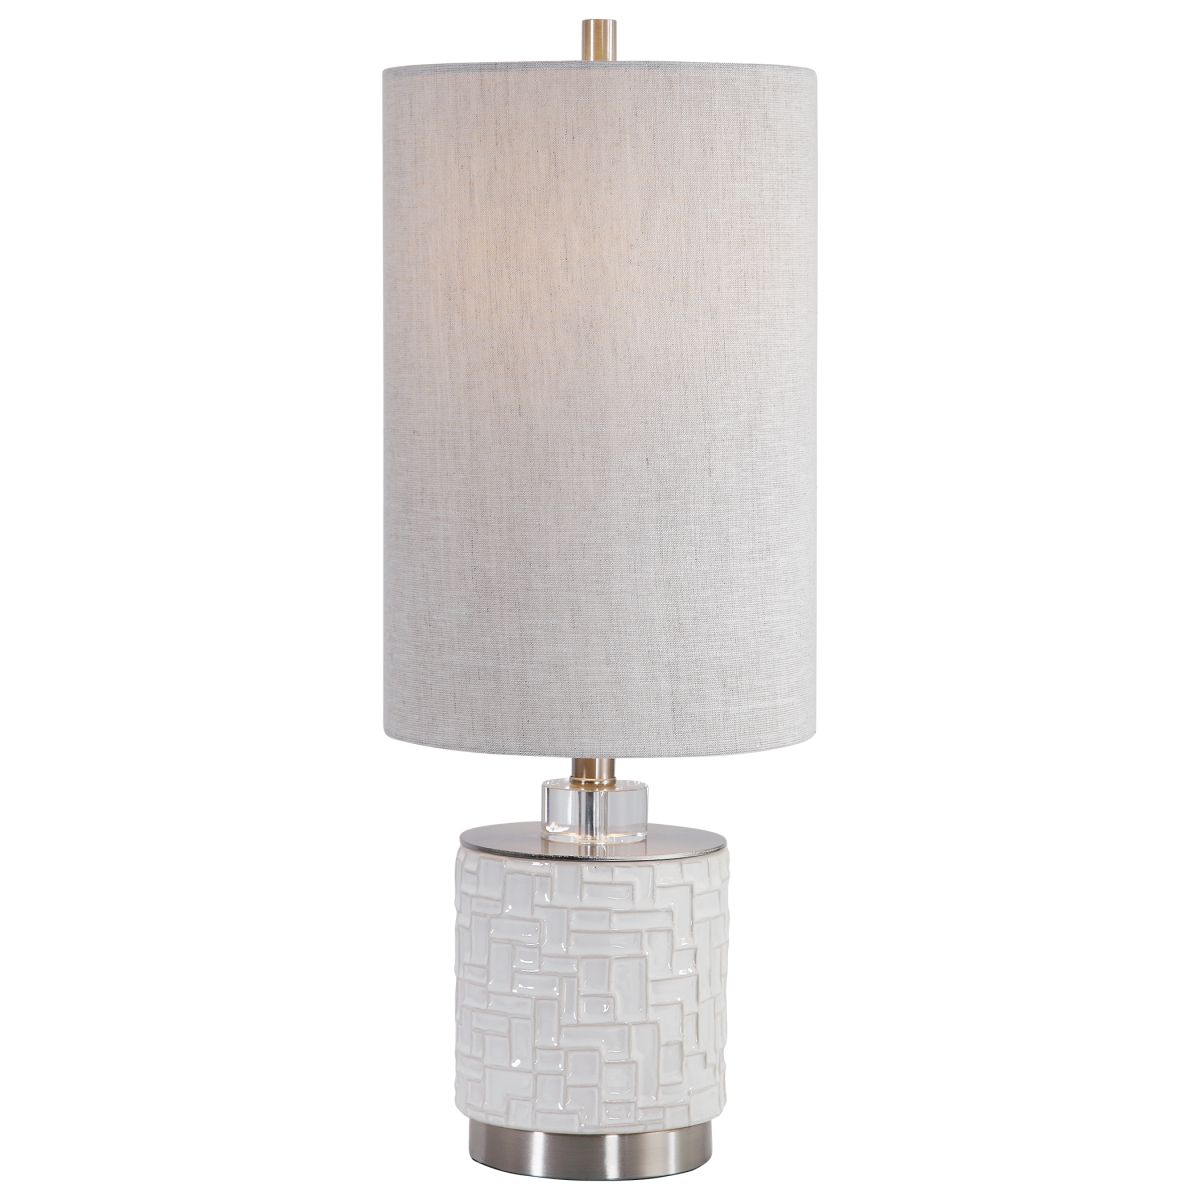 Picture of 212 Main 29731-1 Elyn Glossy White Accent Lamp